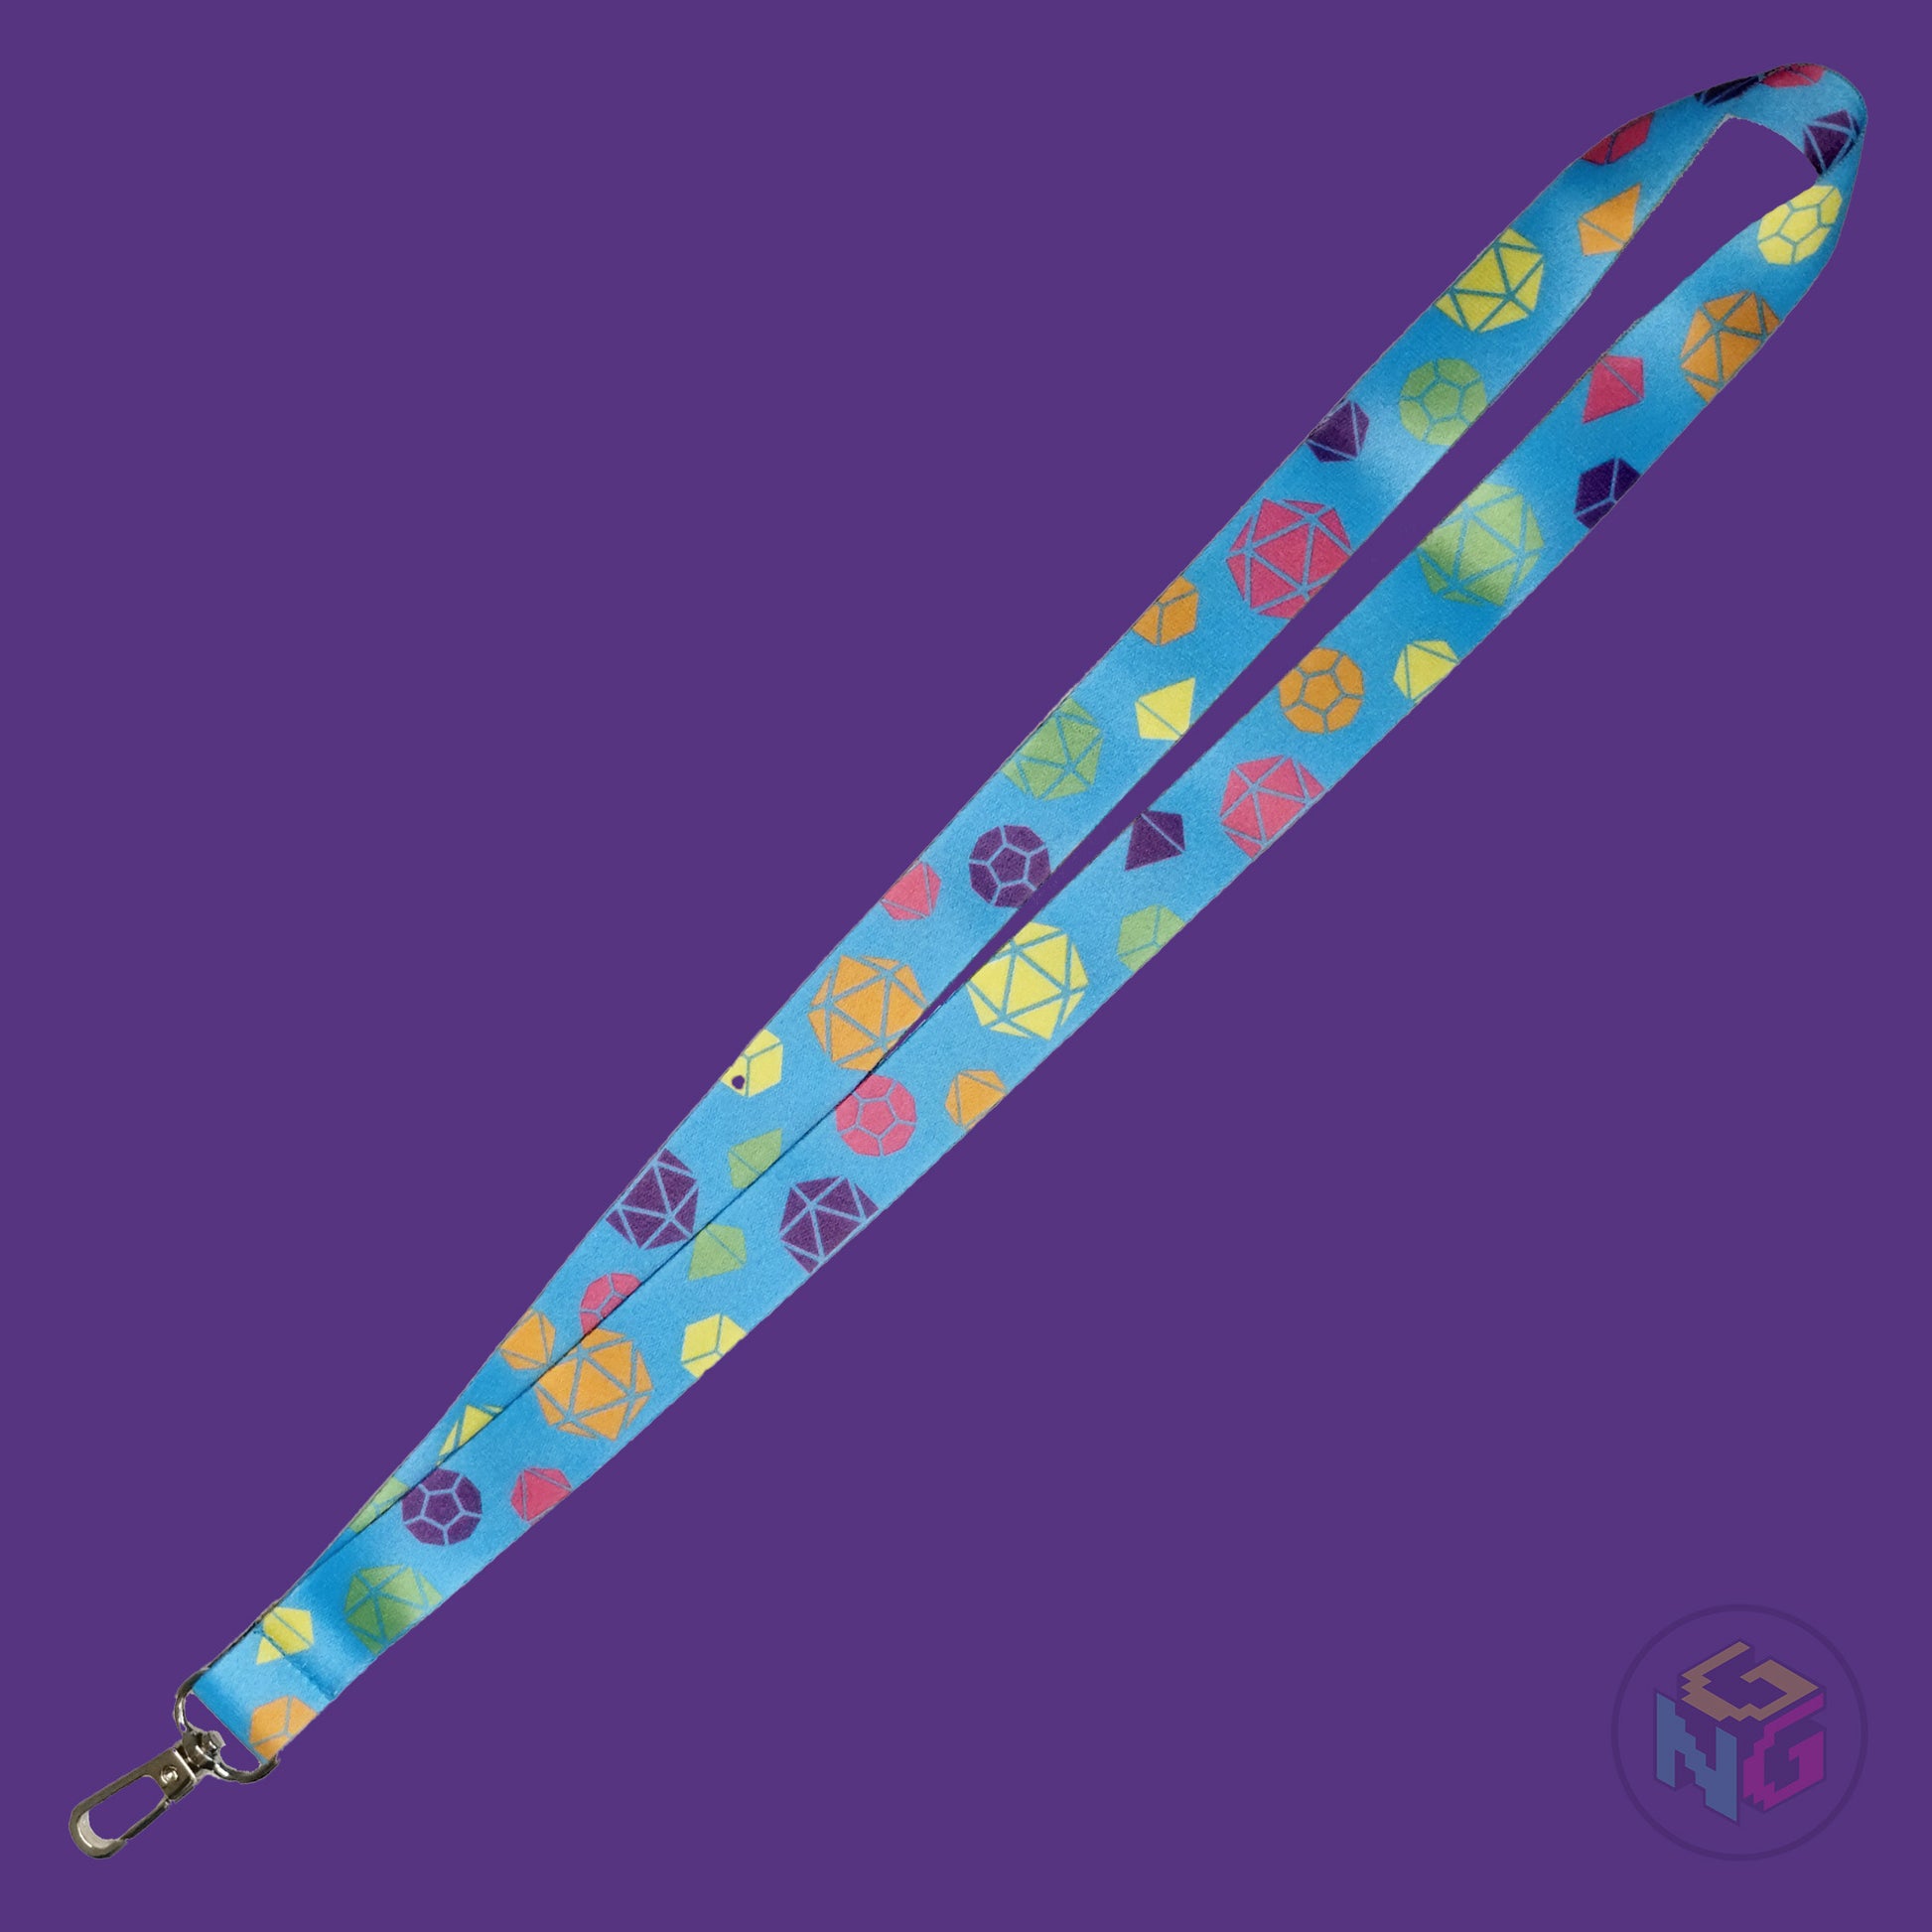 the rainbow pride dice lanyard lying flat showing the complete design and repeating pattern of polyhedral dice in rainbow colors